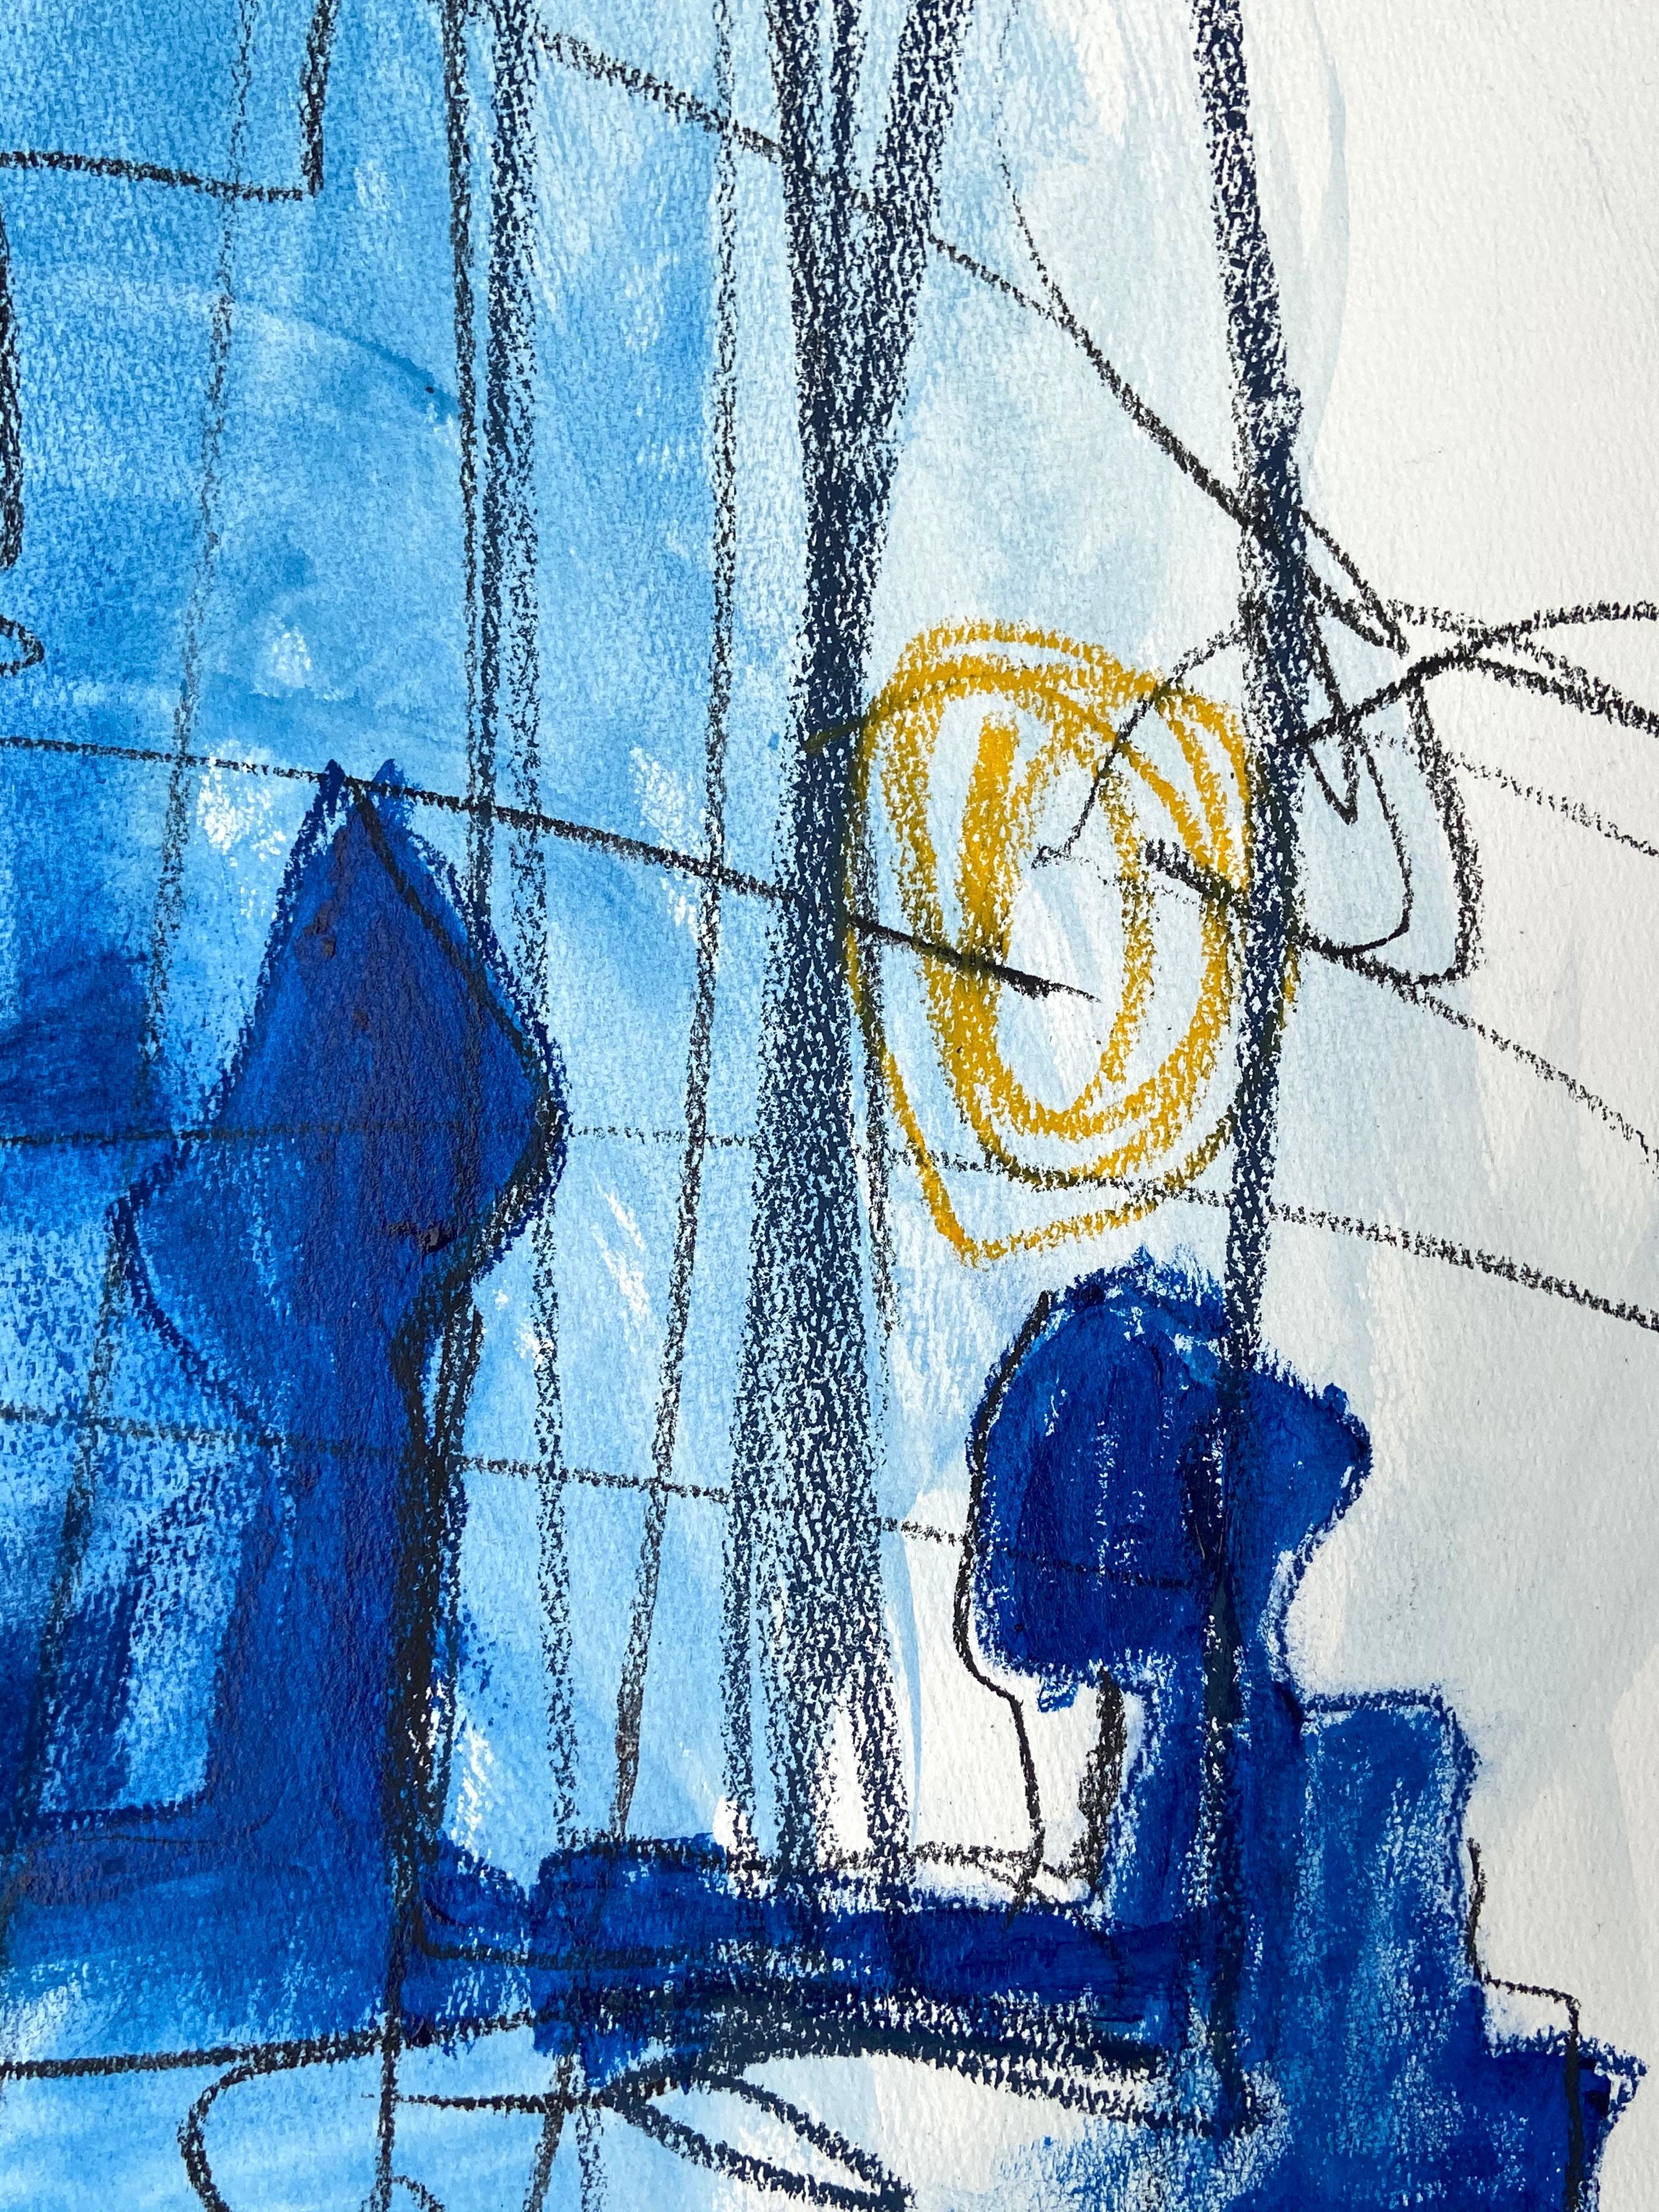 Blue trees (Abstract painting)

Acrylic, charcoal and graphite on paper  - Unframed.

Artwork exclusive to IdeelArt.

Adrienn Krahl’s paintings express a profound sense of drama and emotional weight. Krahl works in a range of mediums, including